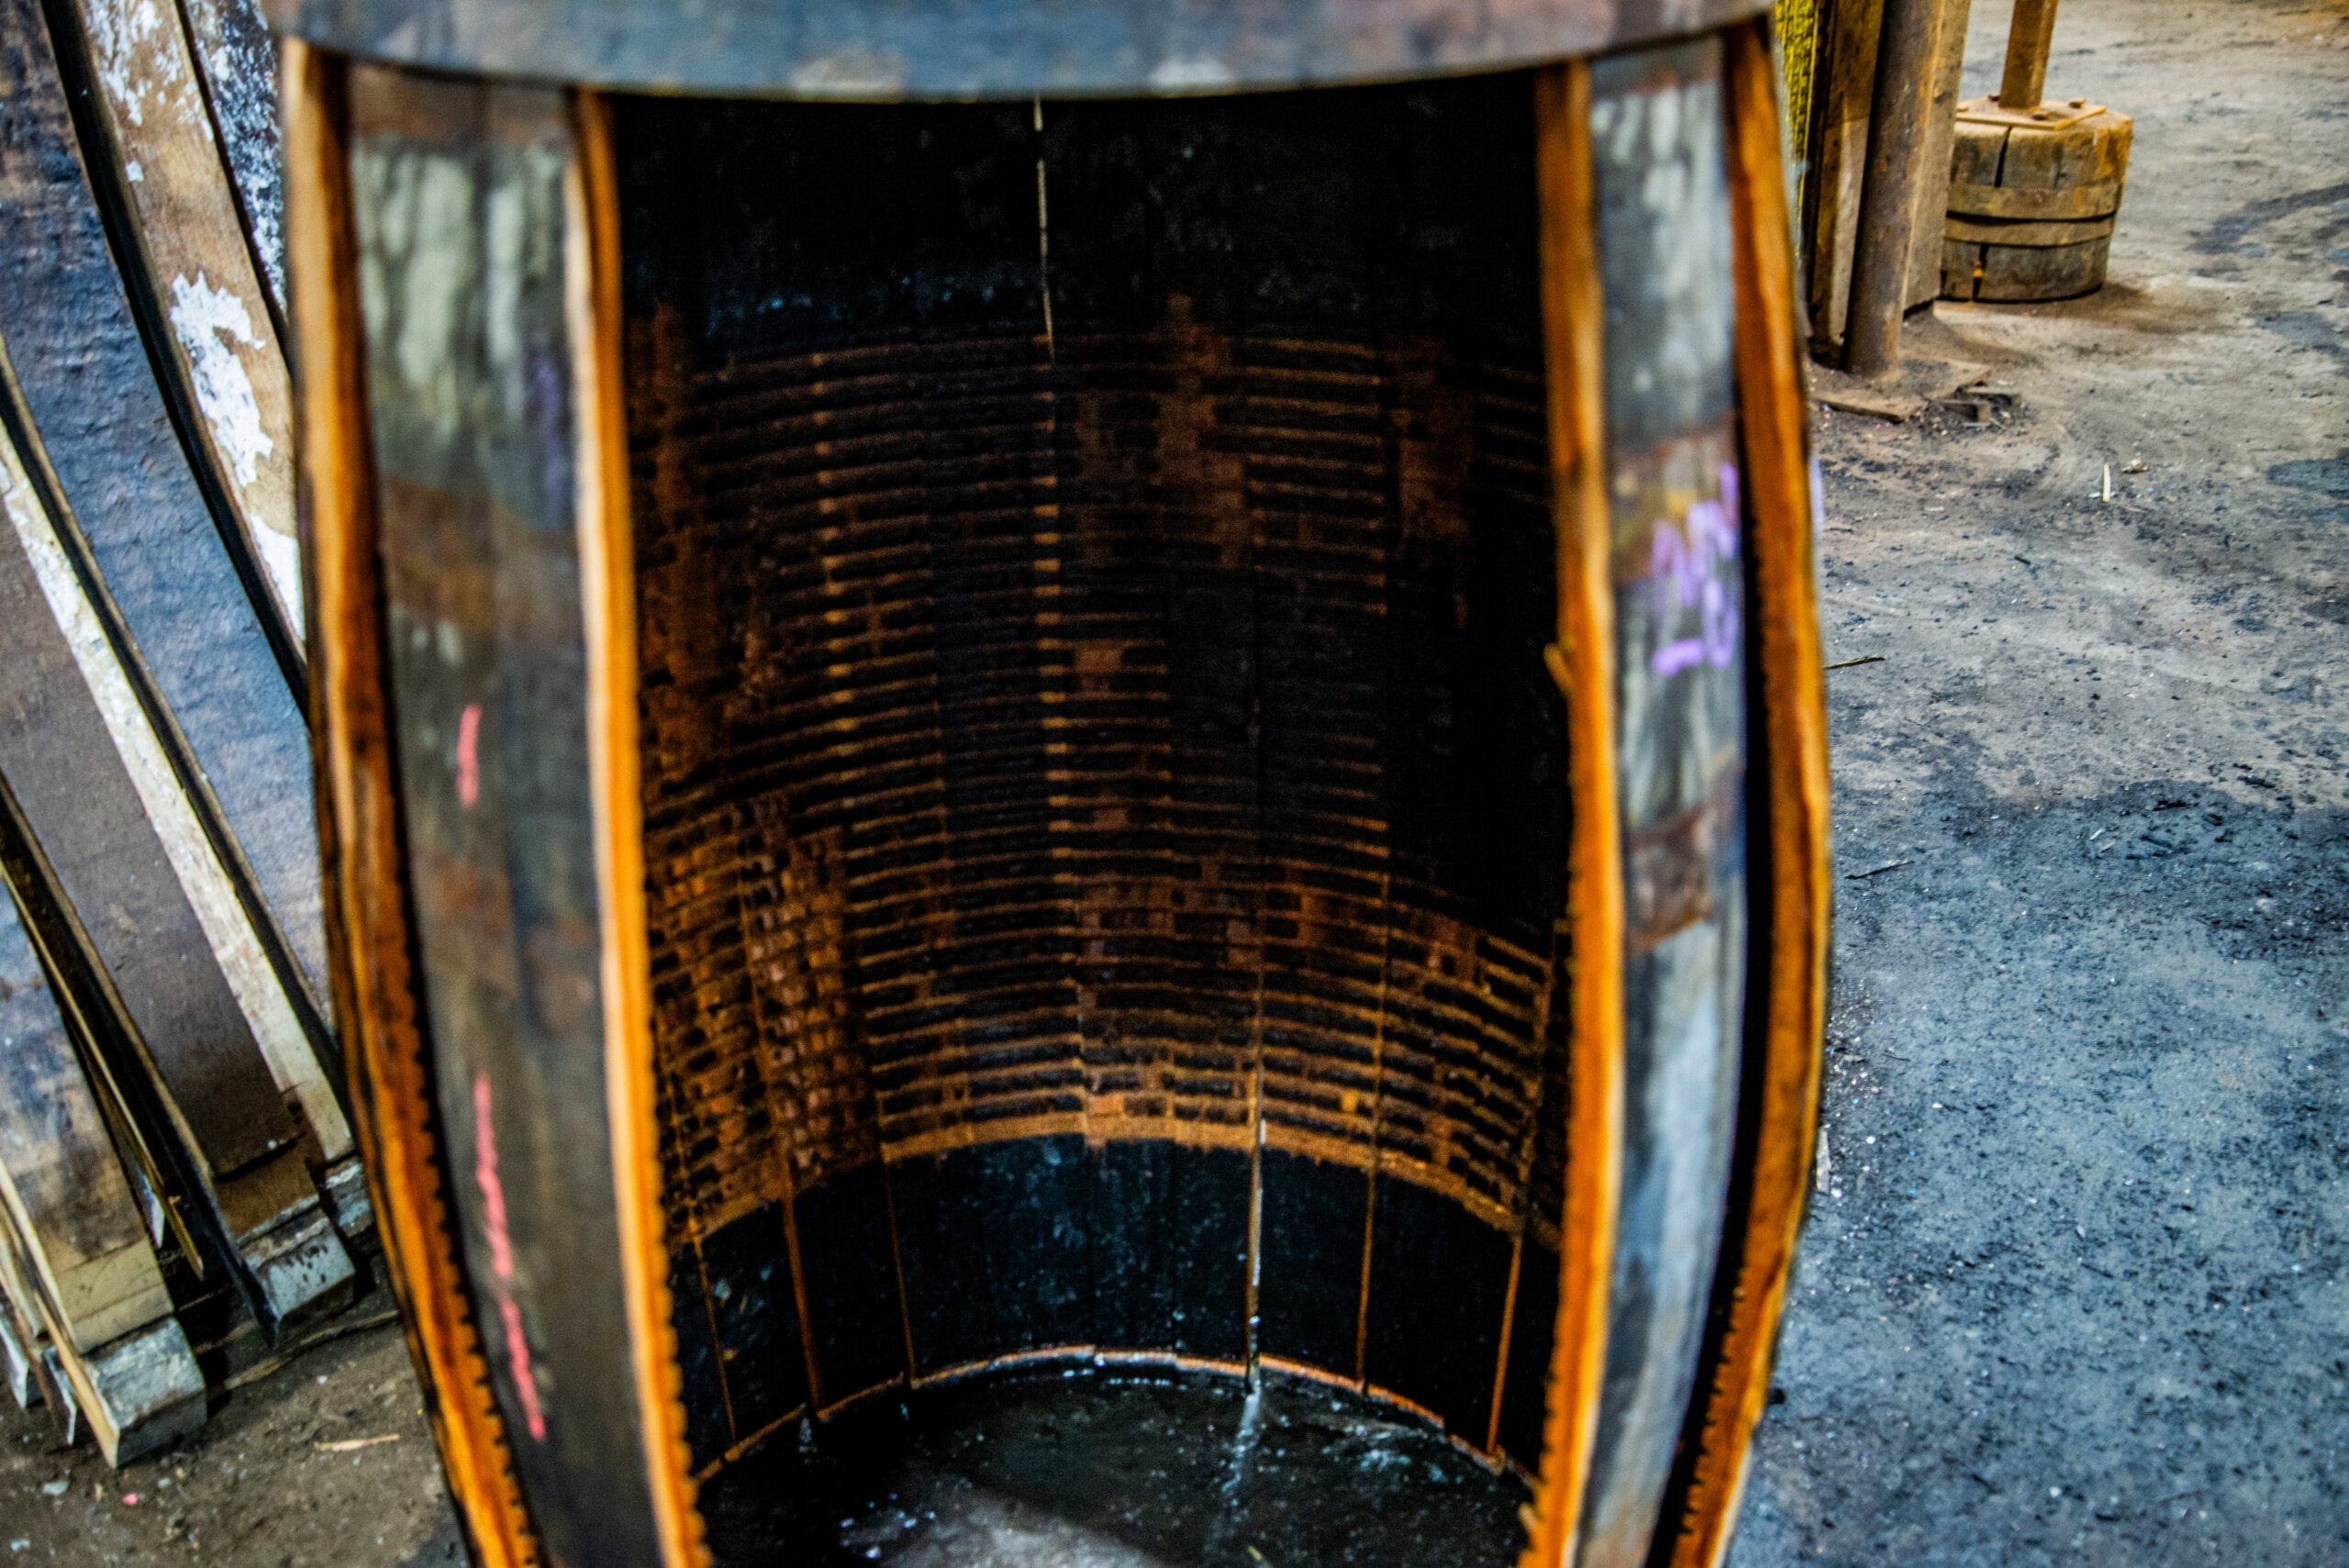 Inspection and disassembling casks